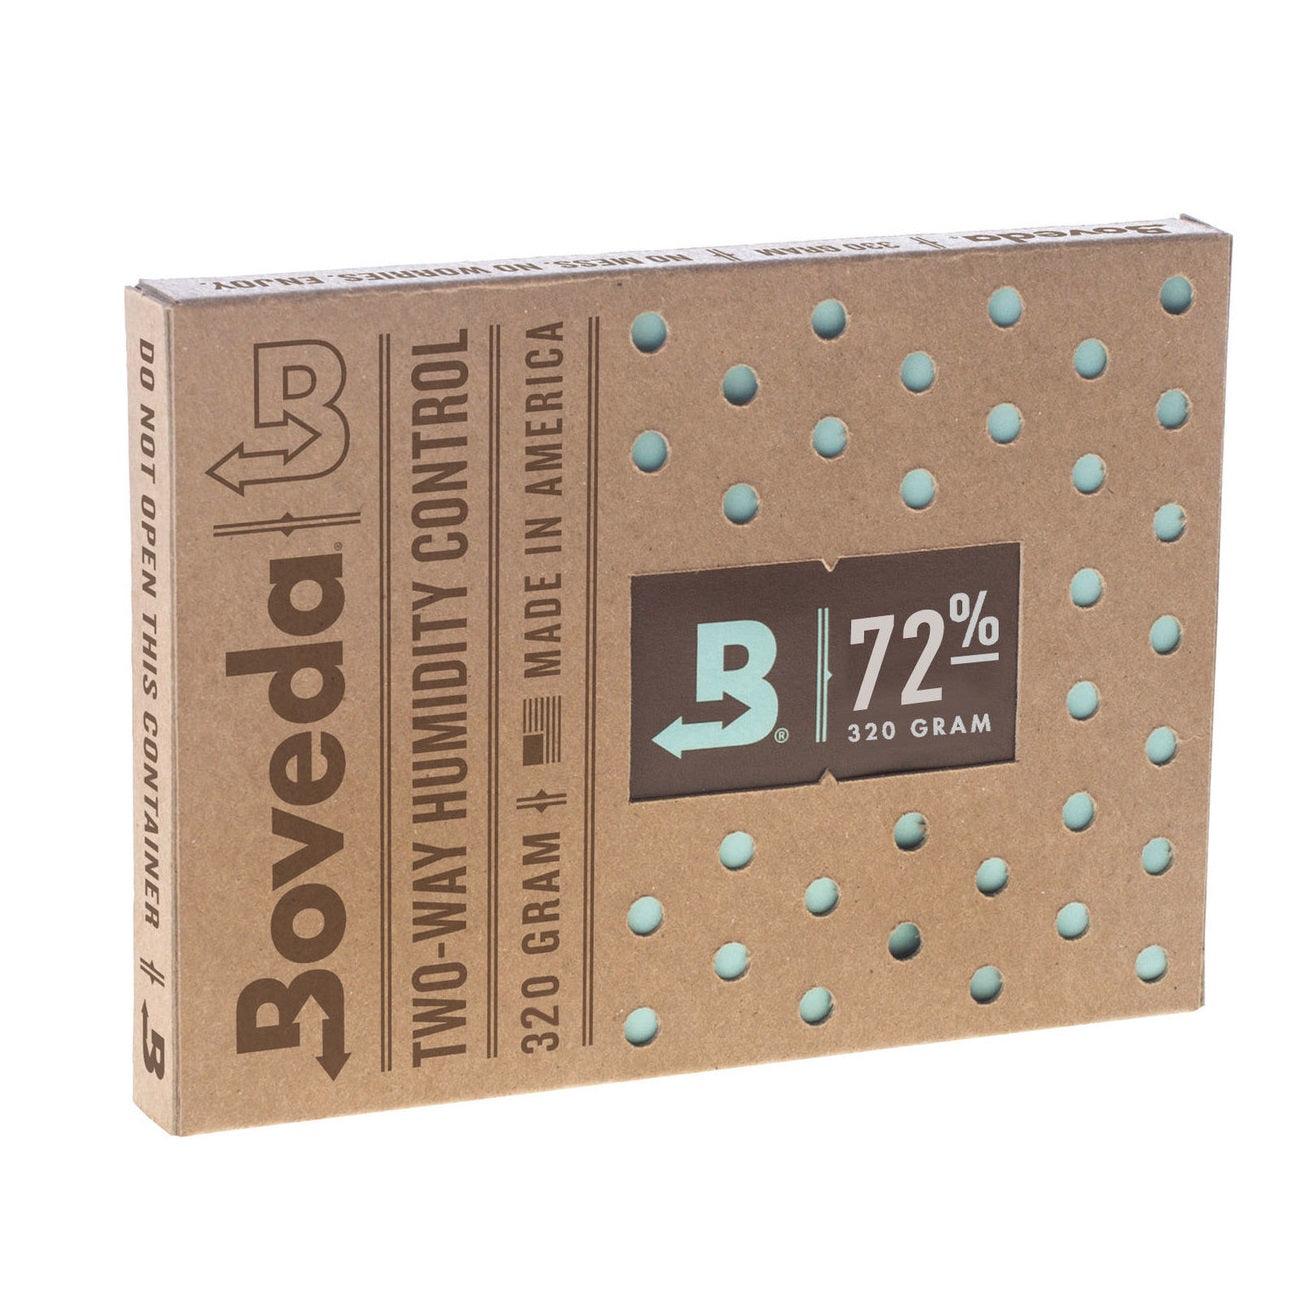 Boveda Humidity Pack 72% 320 grams - hk.cohcigars